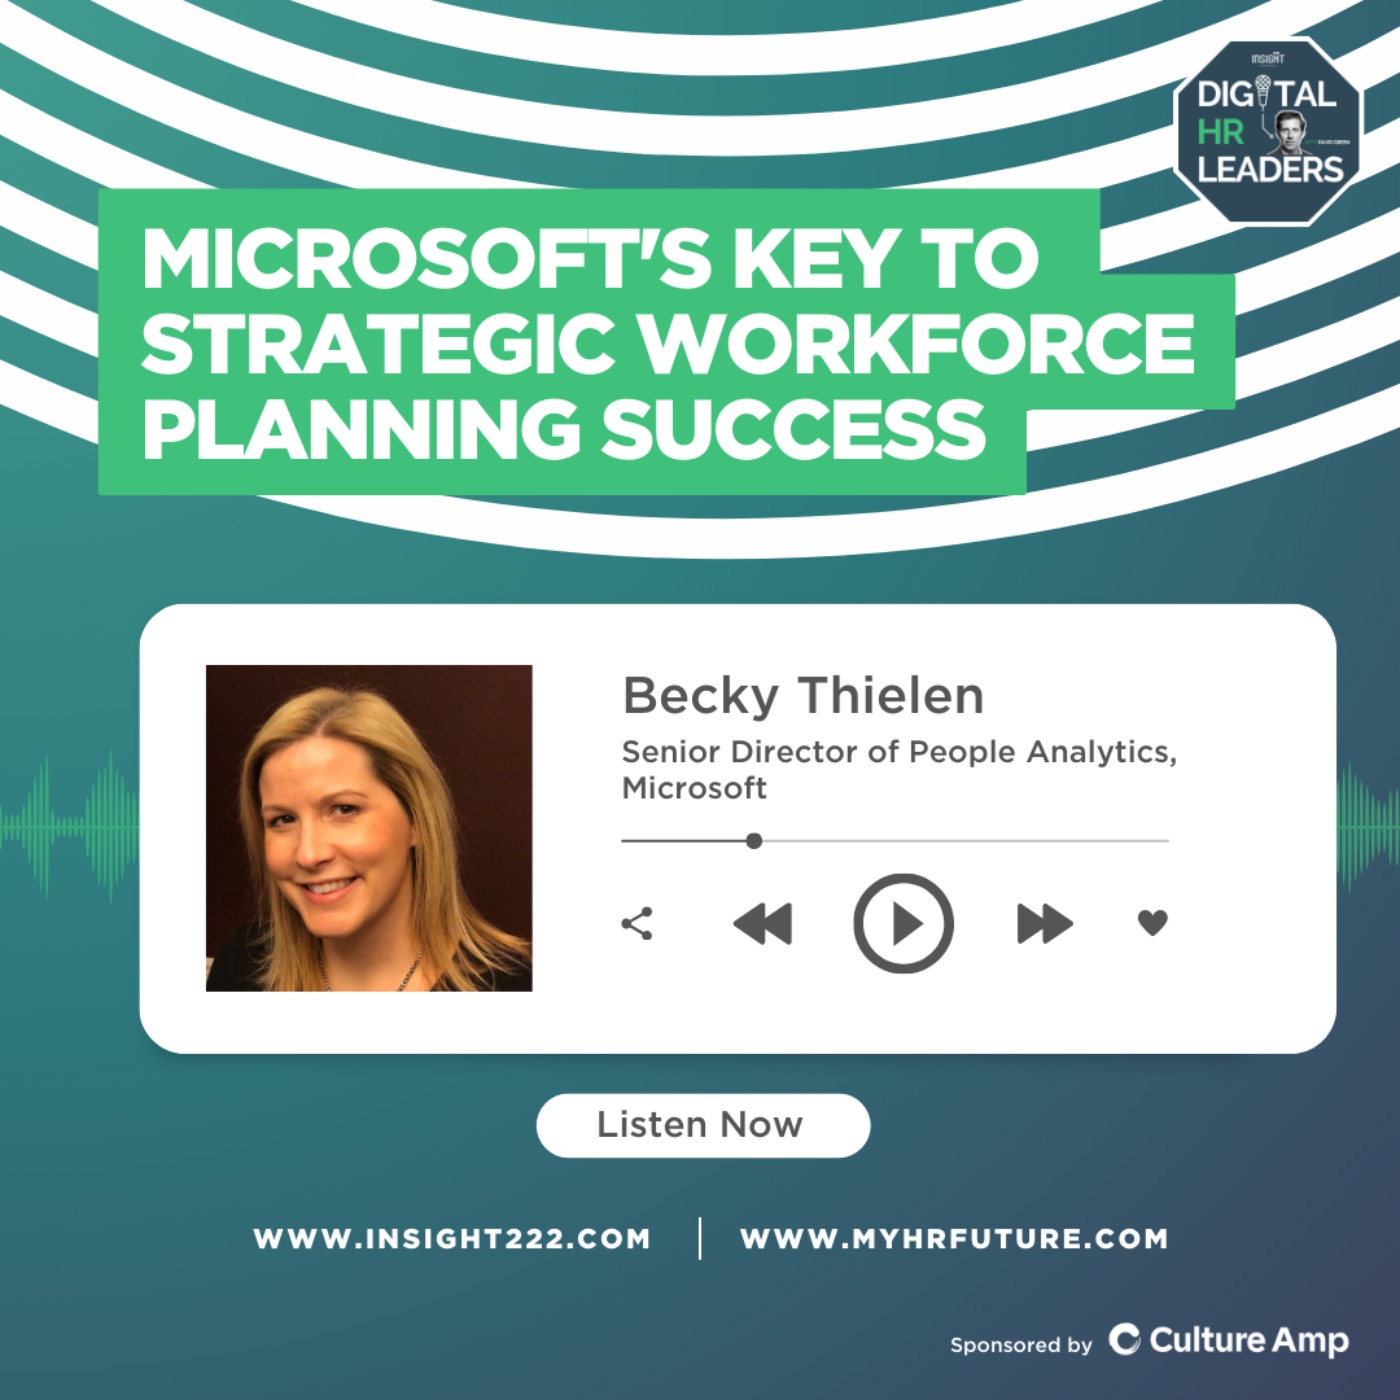 Microsoft's Key to Strategic Workforce Planning Success (an Interview with Becky Thielen)